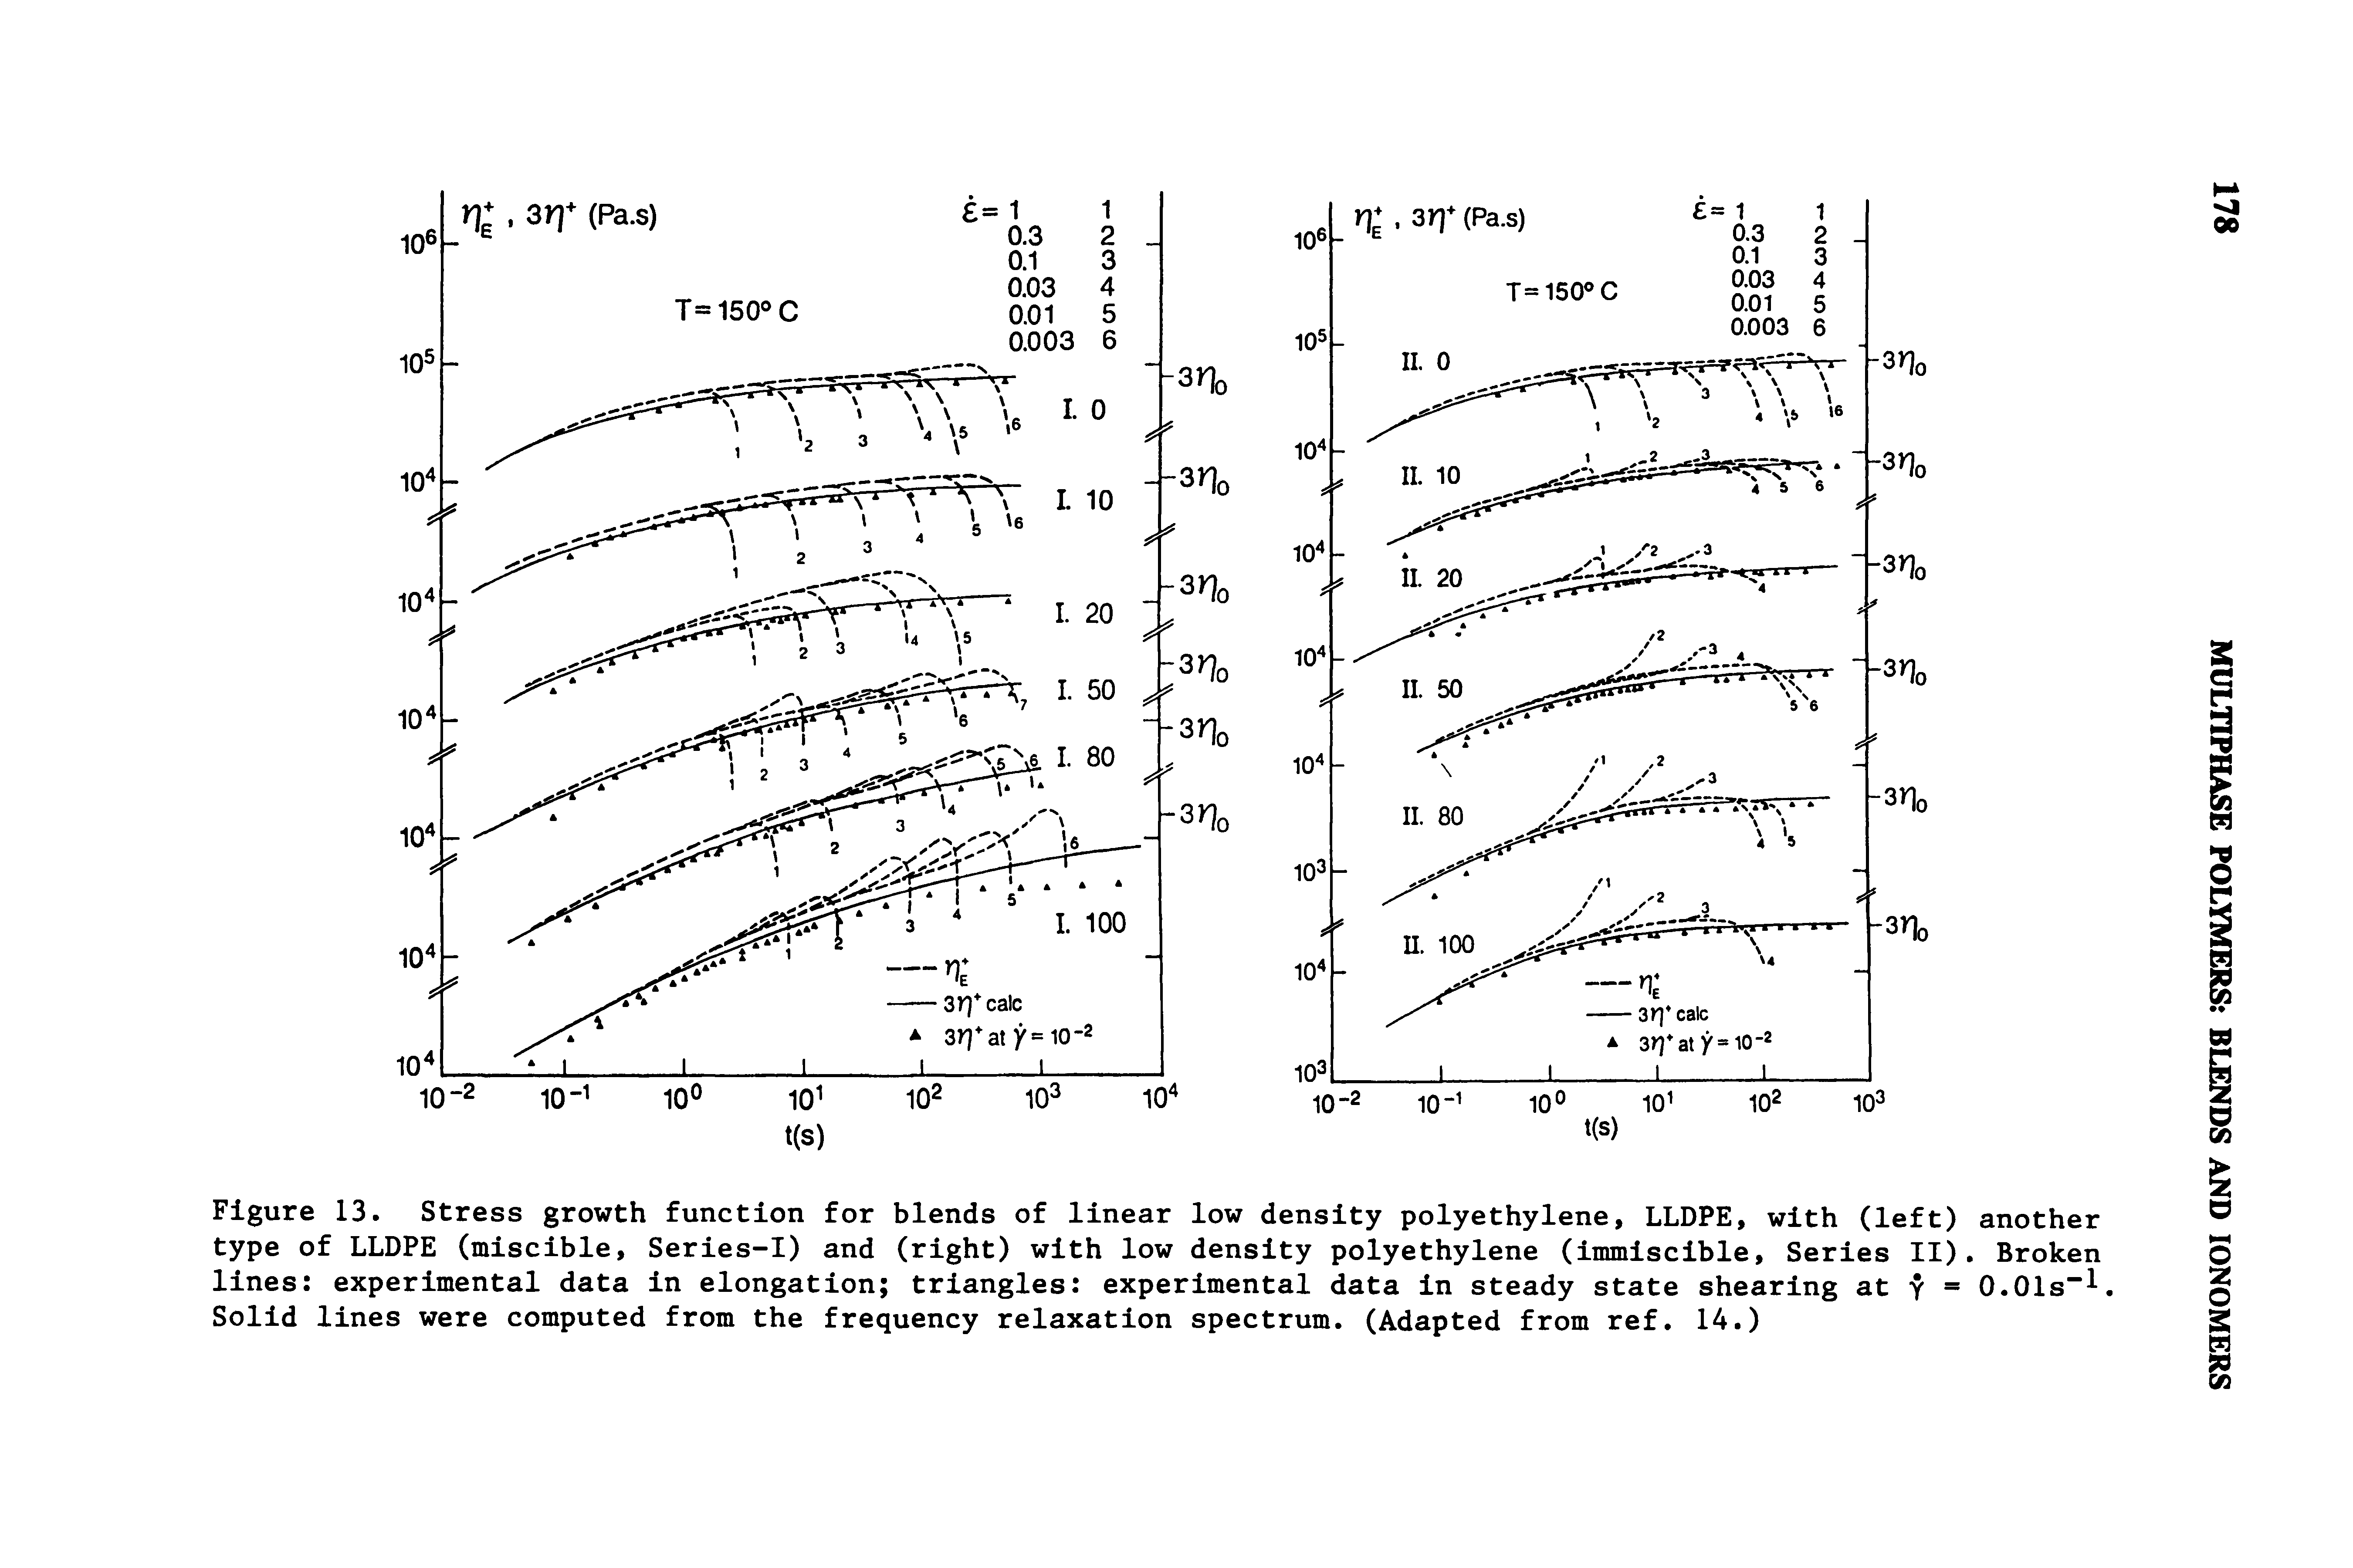 Figure 13. Stress growth function for blends of linear low density polyethylene, LLDPE, with (left) another type of LLDPE (miscible, Series-I) and (right) with low density polyethylene (immiscible. Series II). Broken lines experimental data in elongation triangles experimental data in steady state shearing at y - O.Ols". Solid lines were computed from the frequency relaxation spectrum. (Adapted from ref. 14.)...